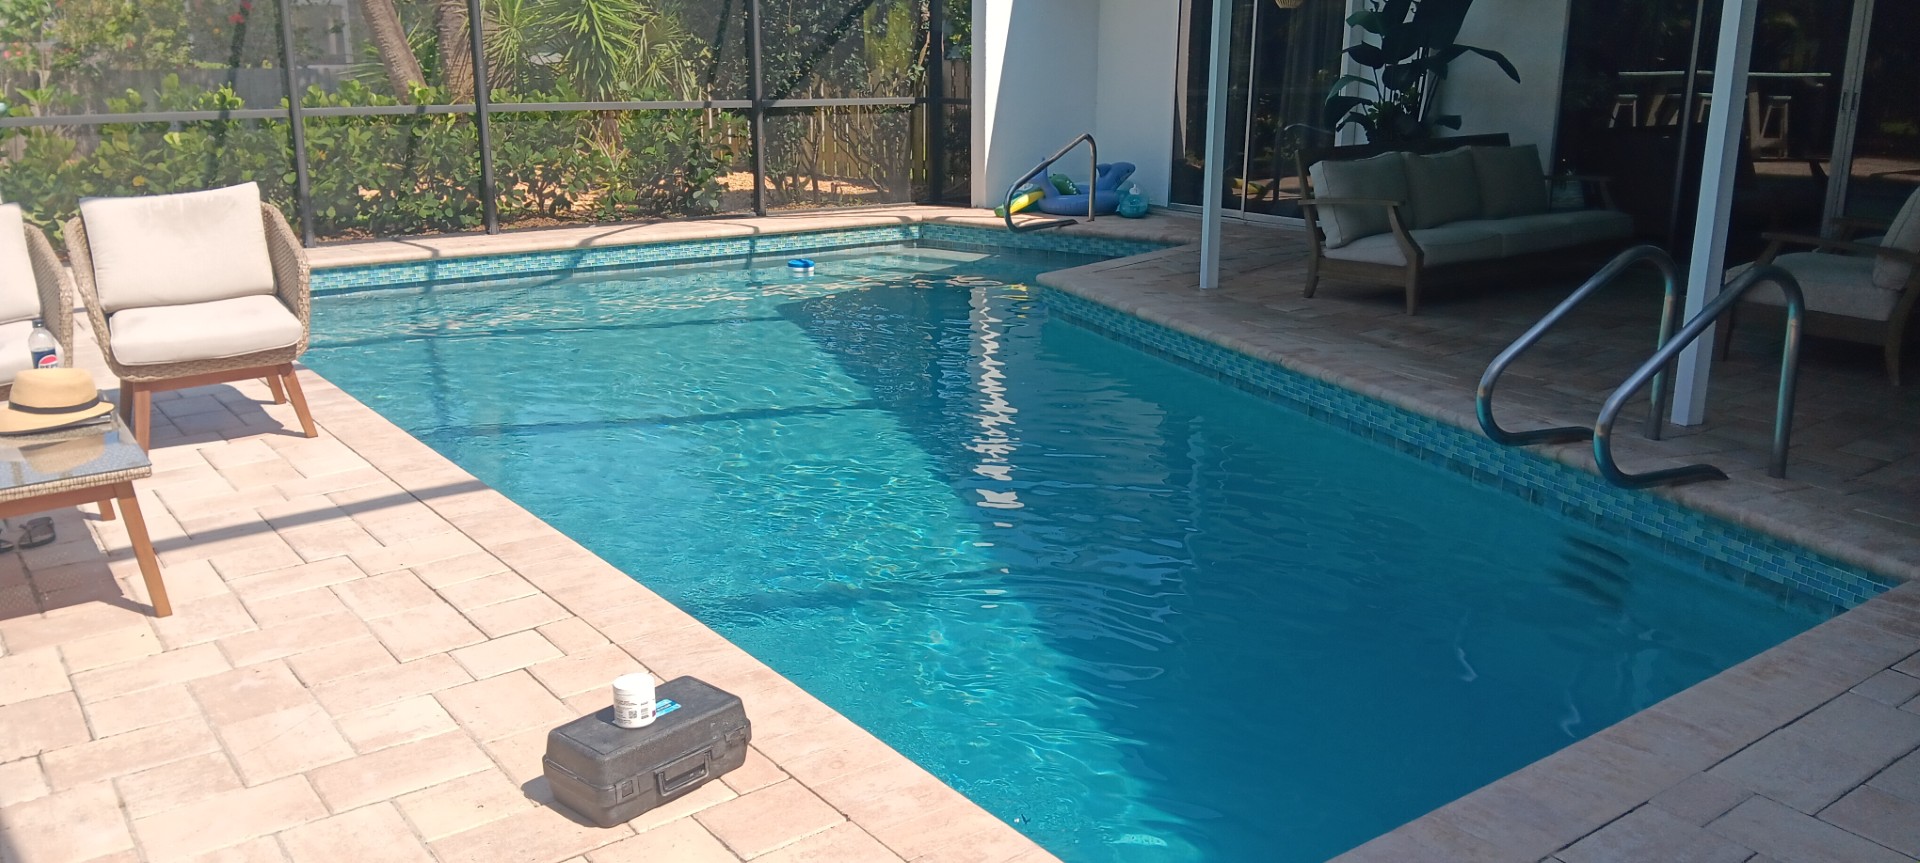 Green to Clean service performed in Sarasota Florida